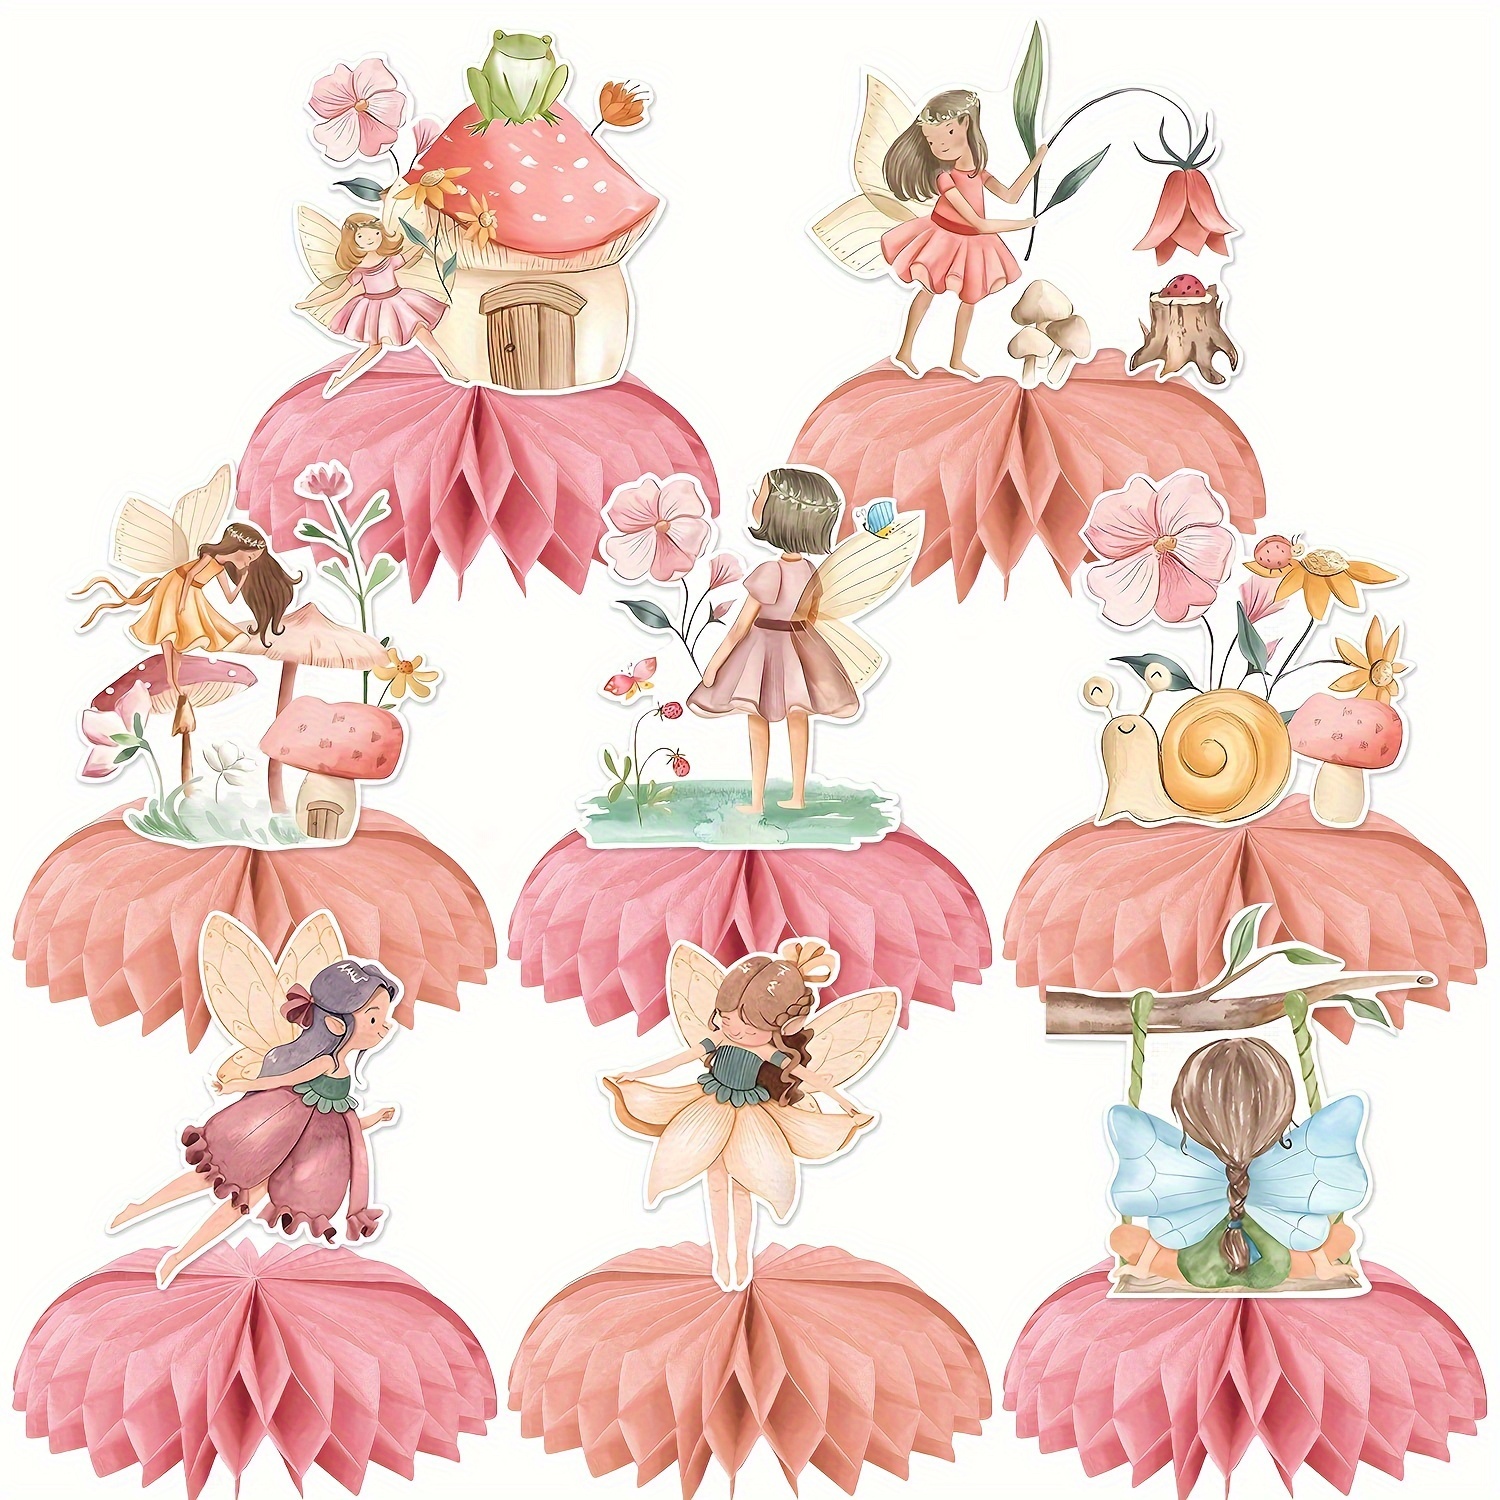 

Fairy-themed Honeycomb Table Decorations For Birthday Parties - Princess Party Supplies, No Power Needed